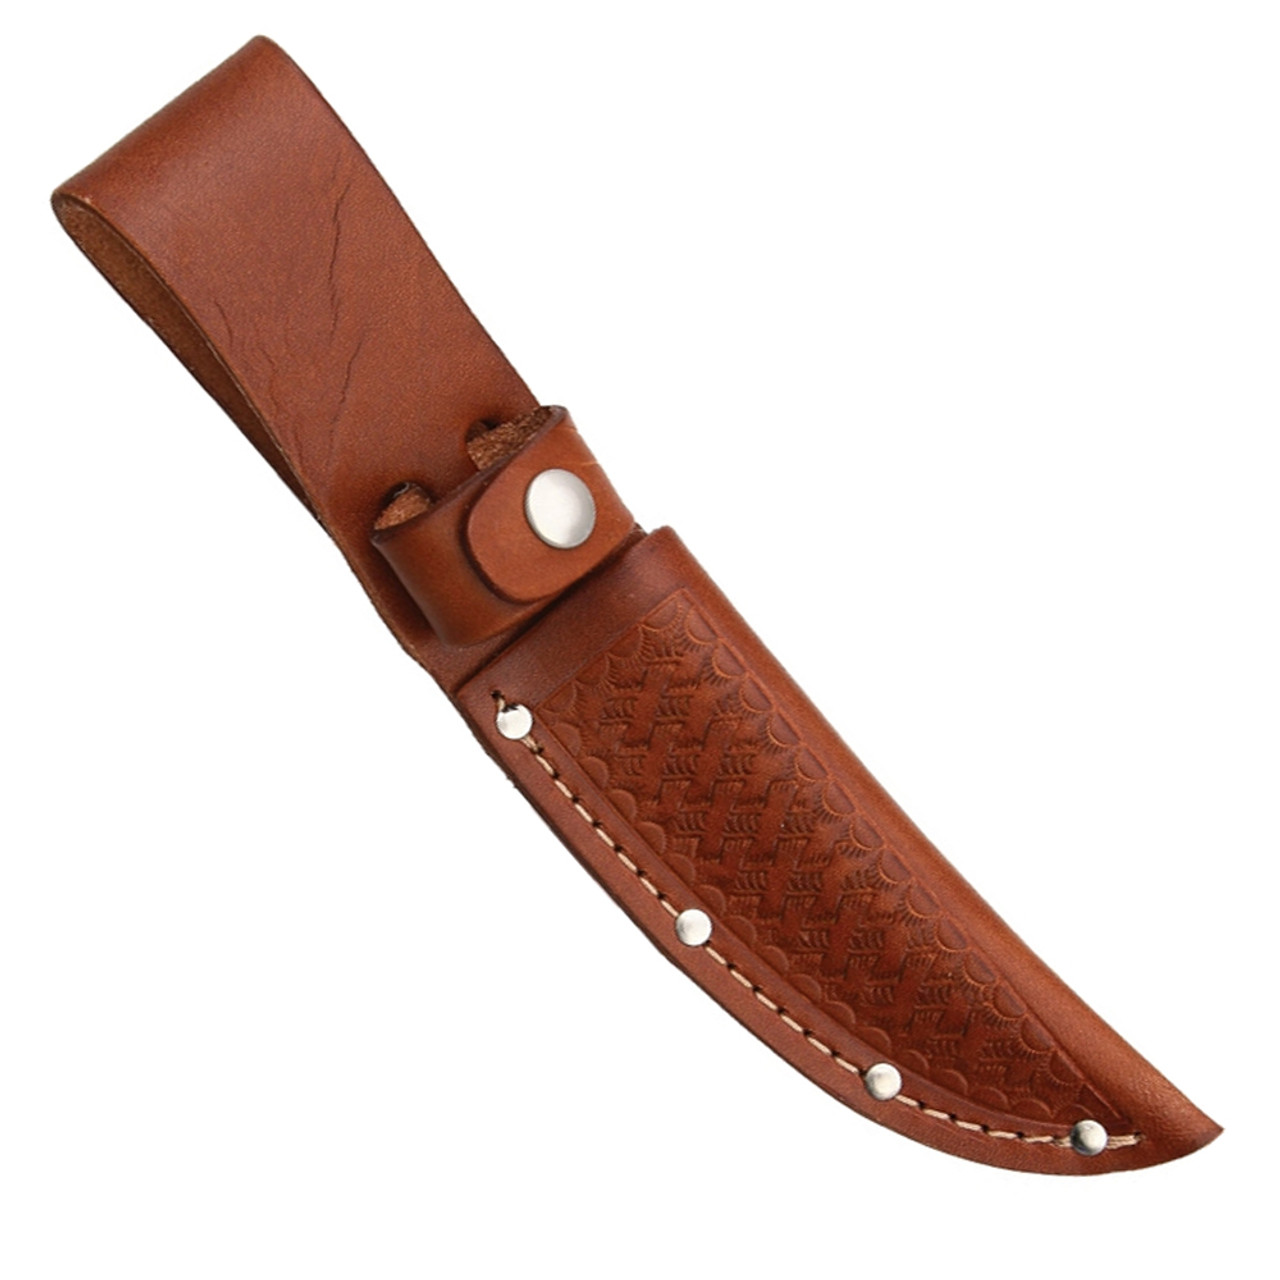 8.75" Straight Knife Sheath, Fits up to 4" Blade, Brown Basketweave Leather